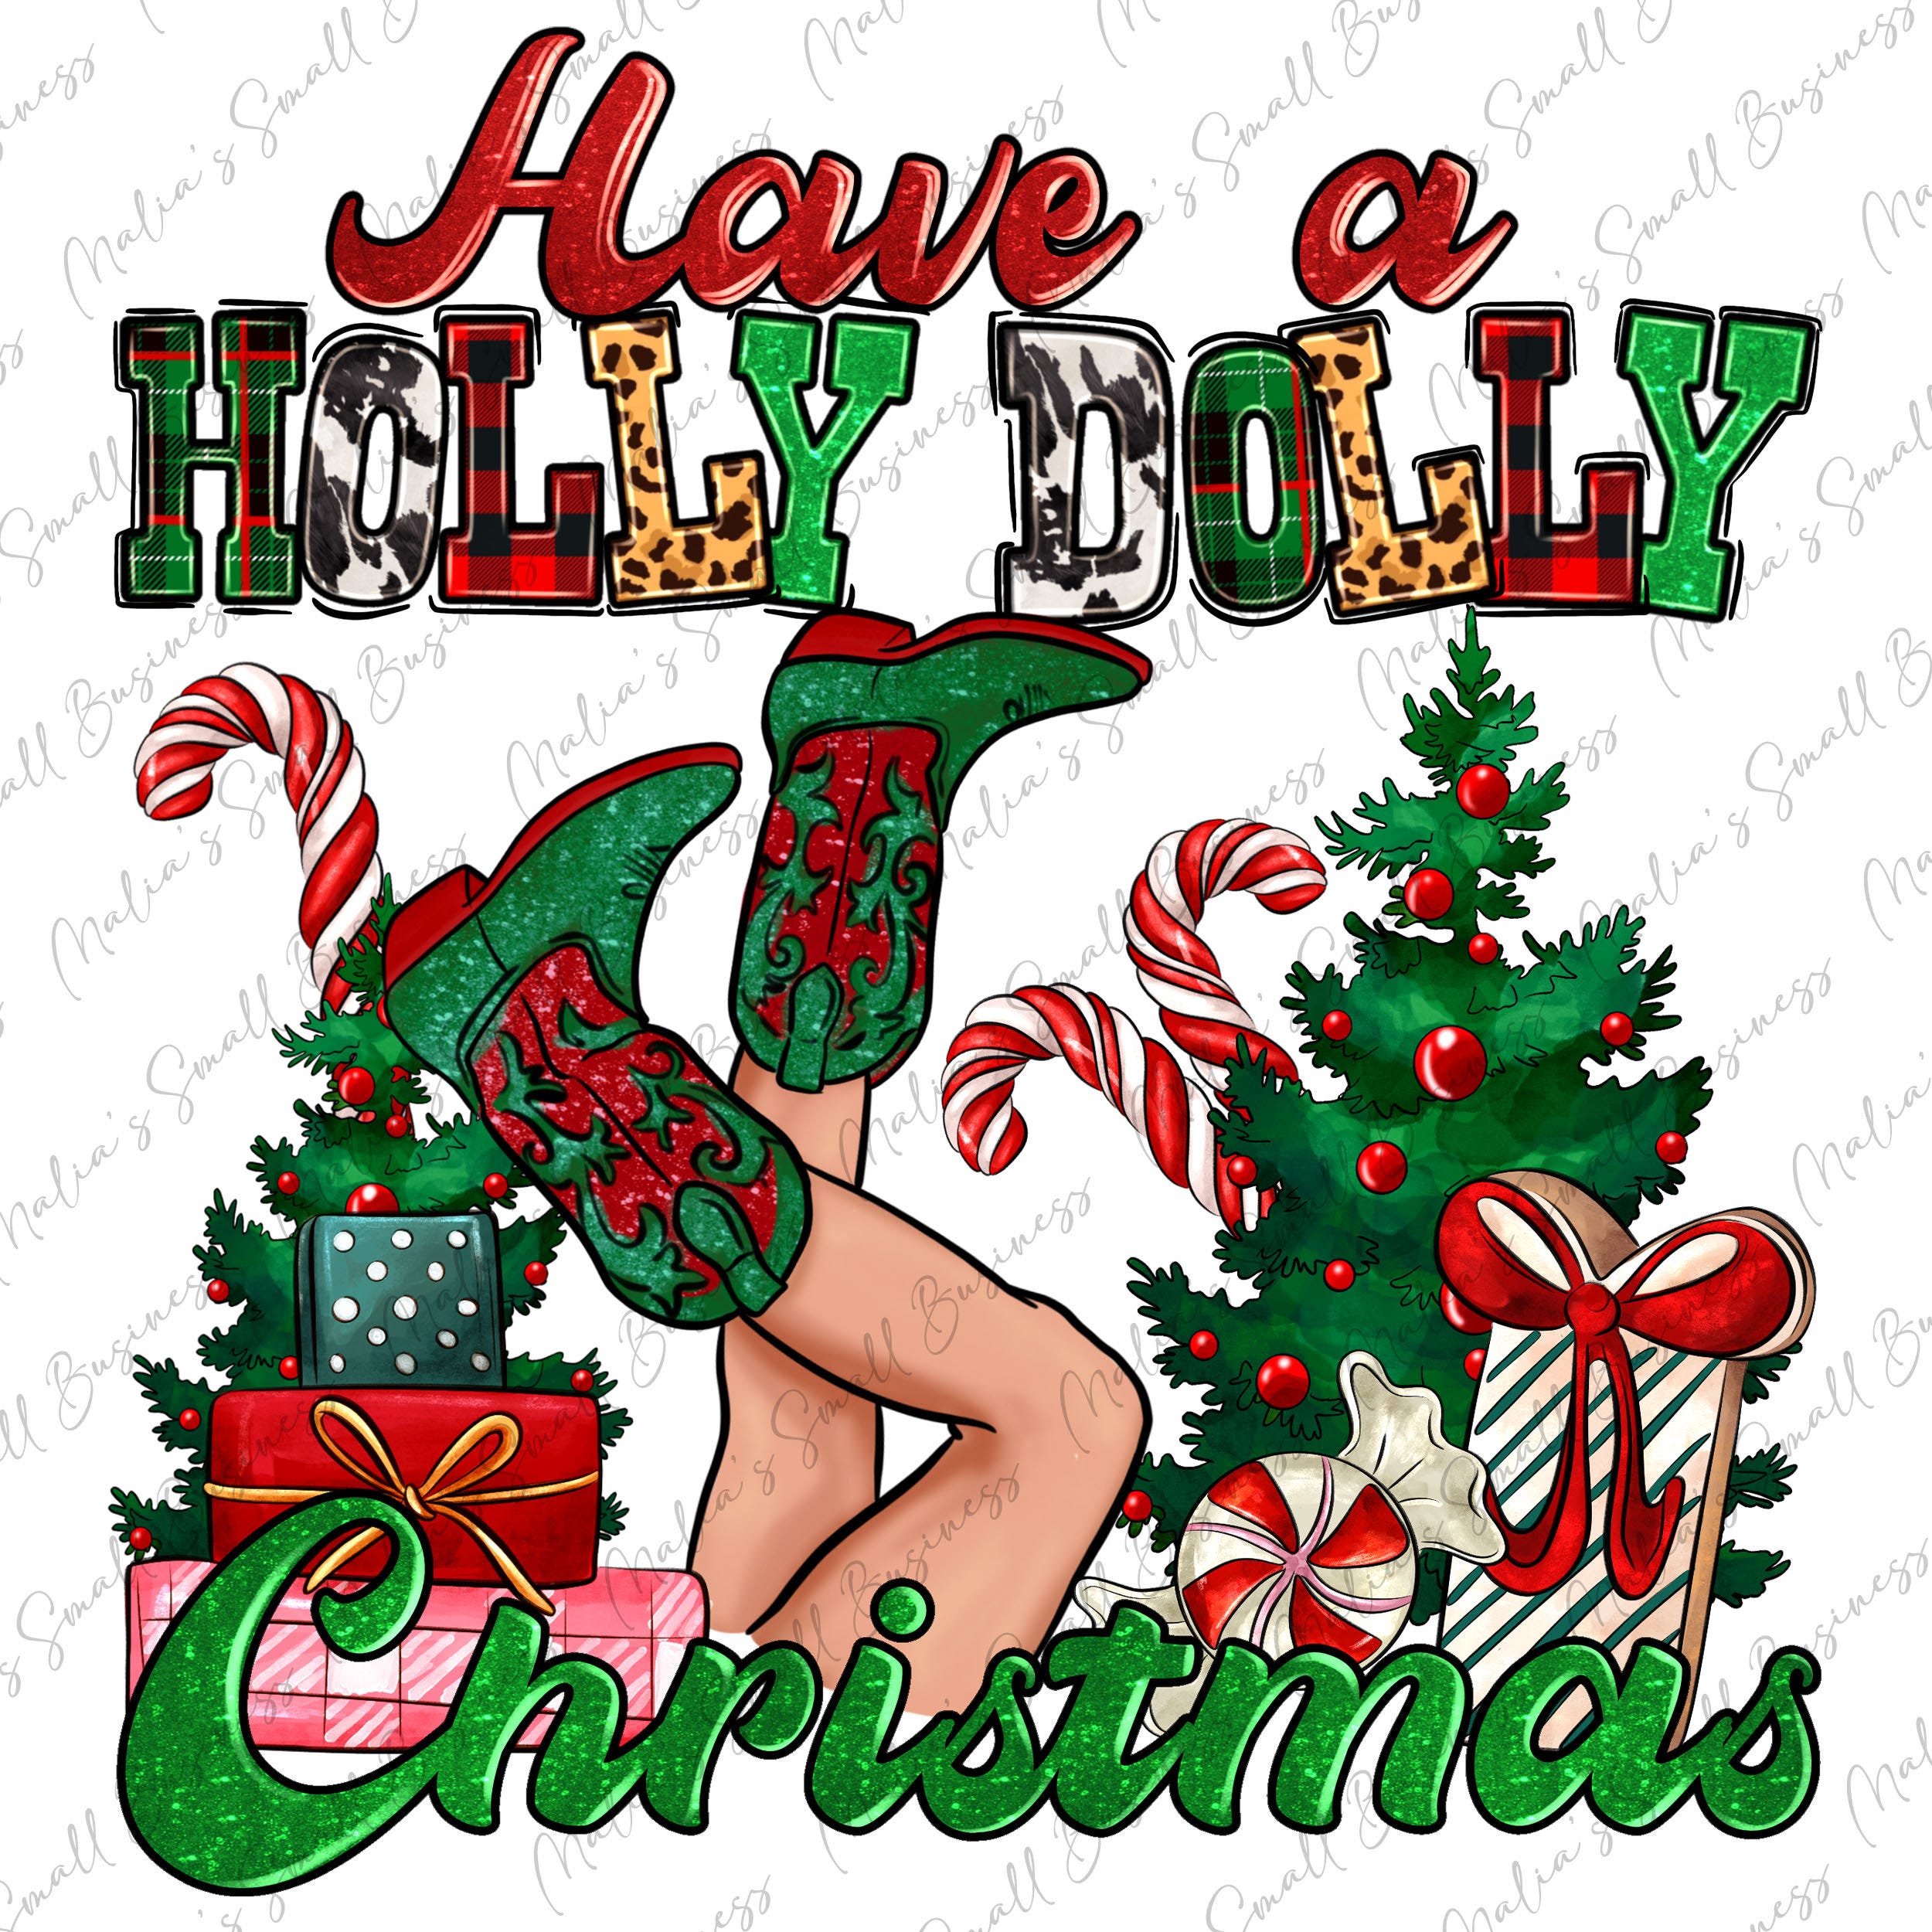 Have a holly dolly Christmas png sublimation design download, Merry Christmas png, Christmas vibes png,Happy New Year png,sublimate download